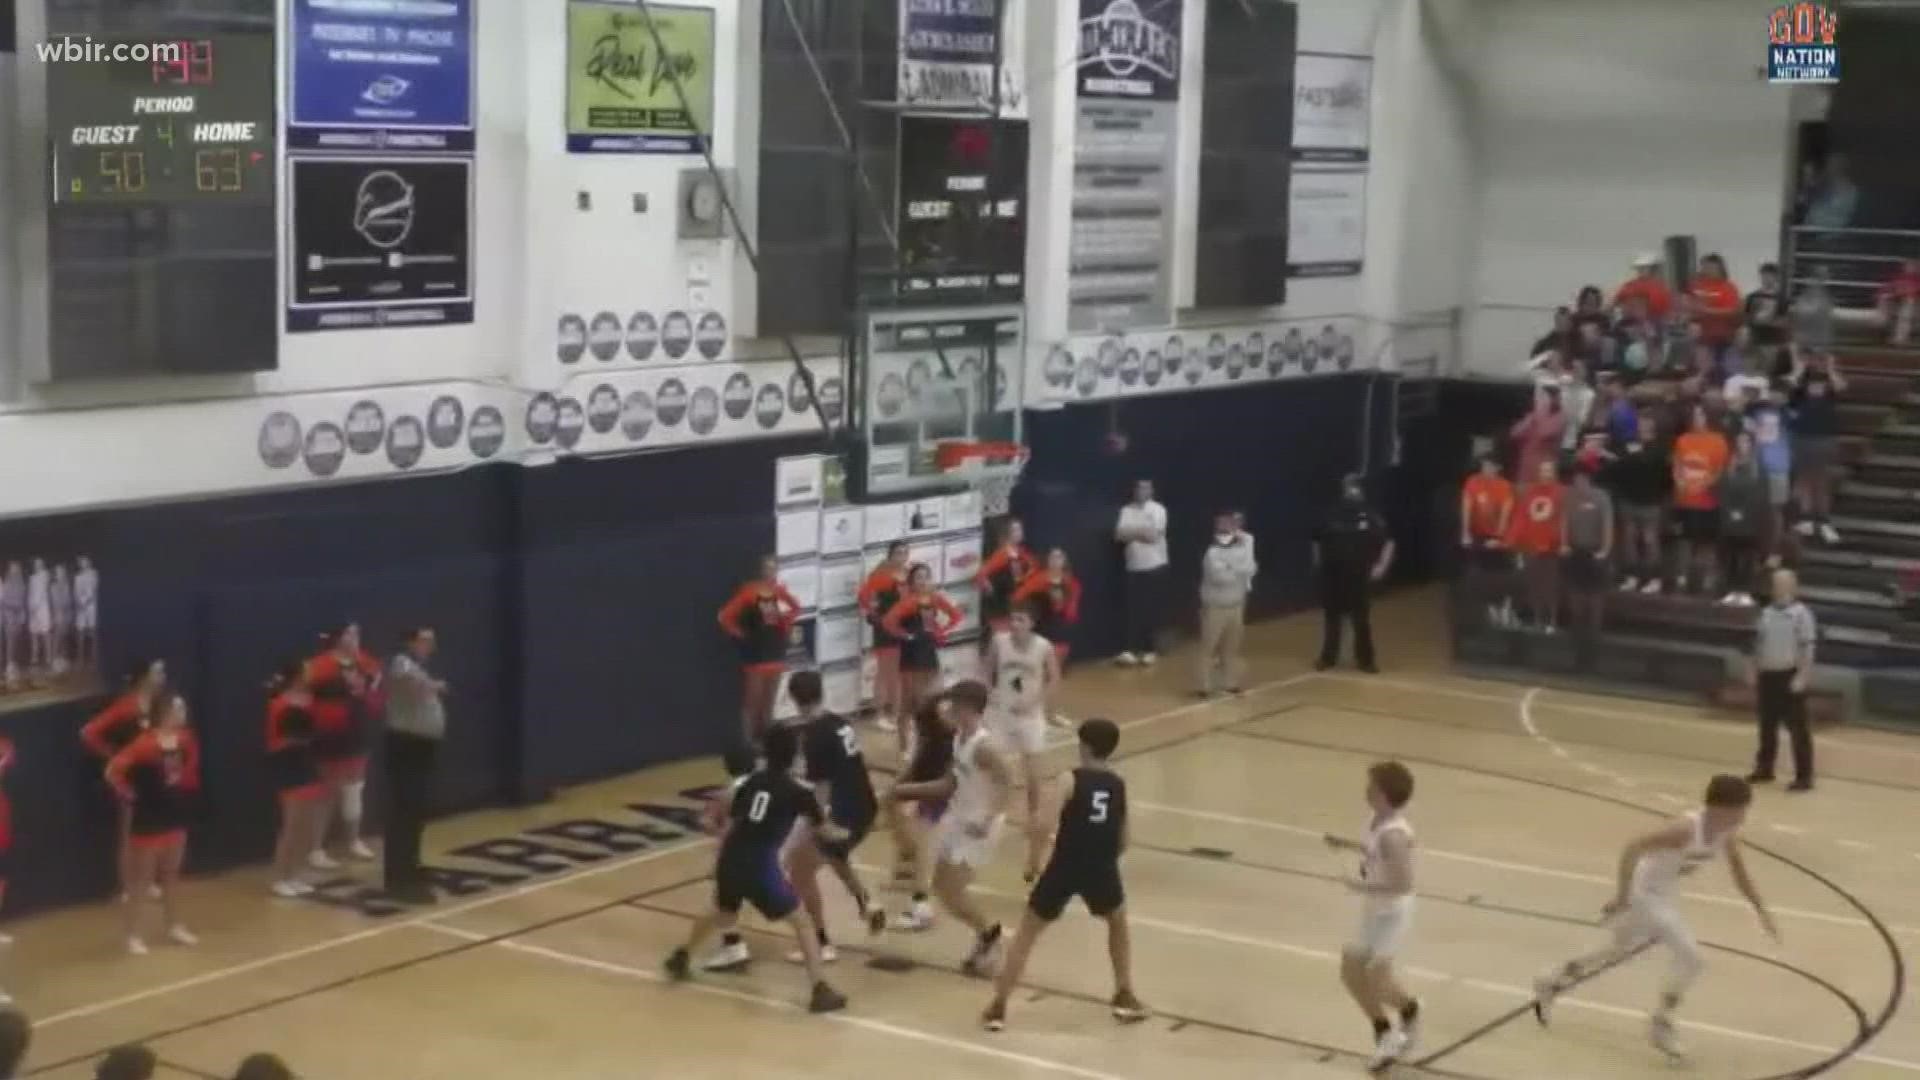 A Farragut High School basketball player ejected in a scuffle against William Blount said he's facing online harassment.